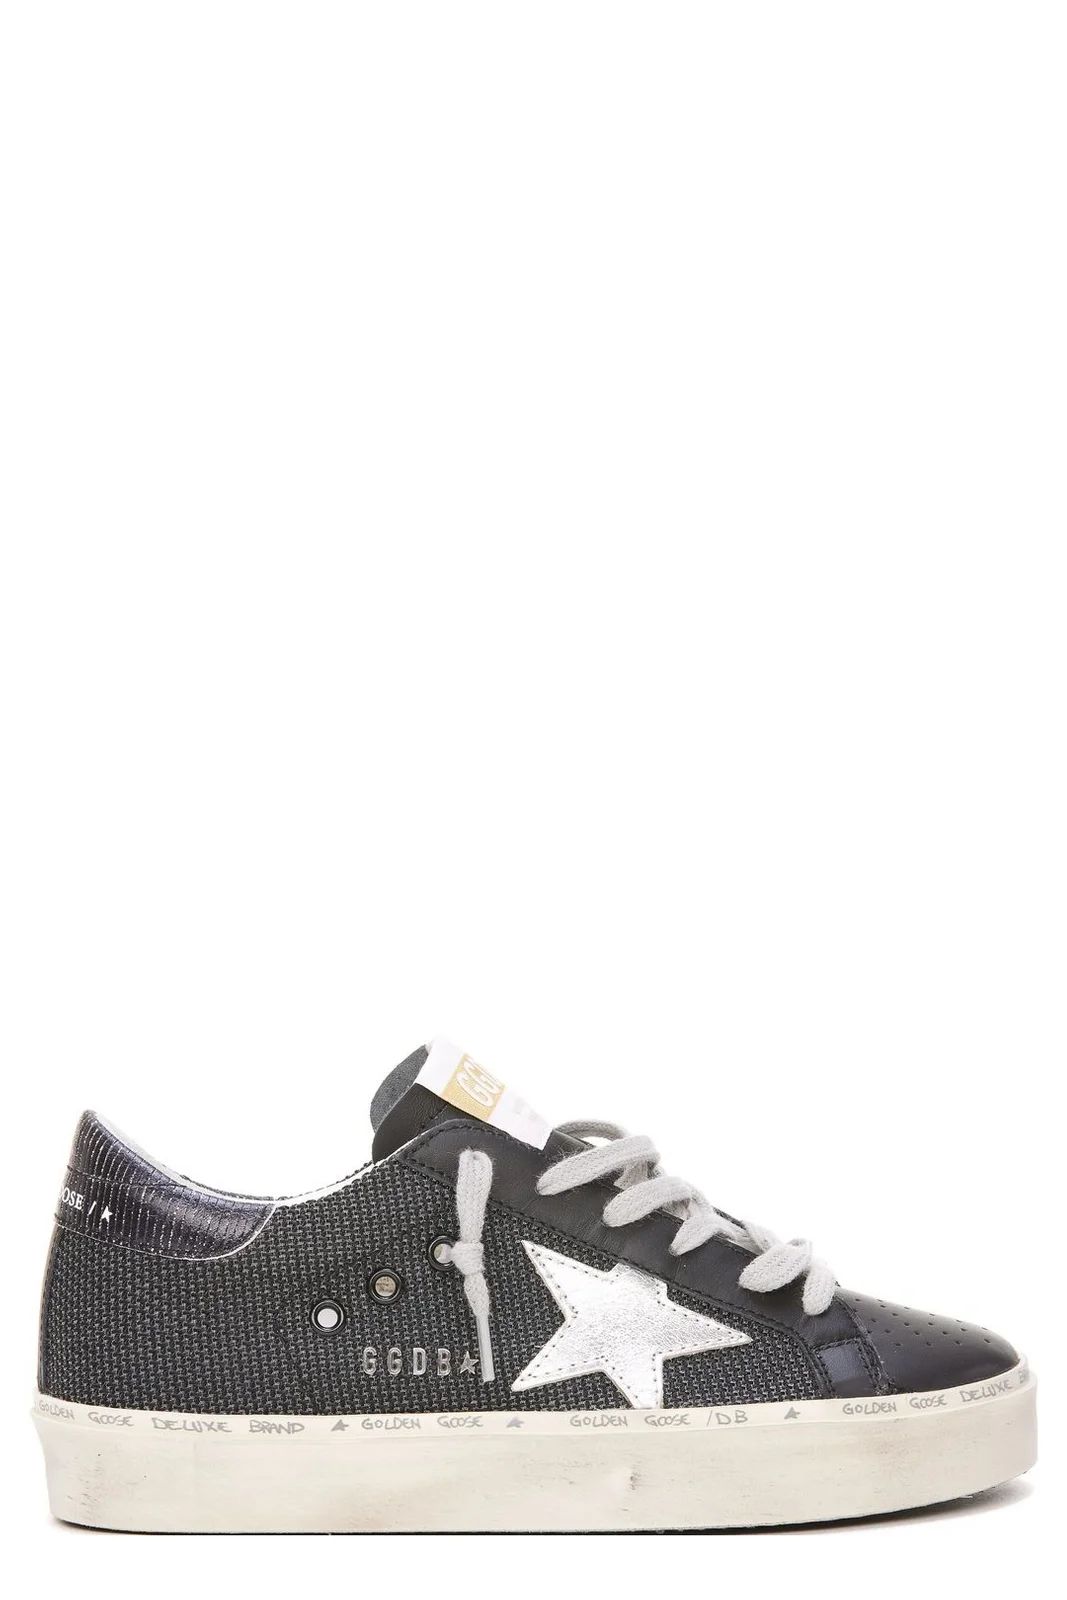 Golden Goose Deluxe Brand Hi Star Lace-Up Sneakers | Cettire Global